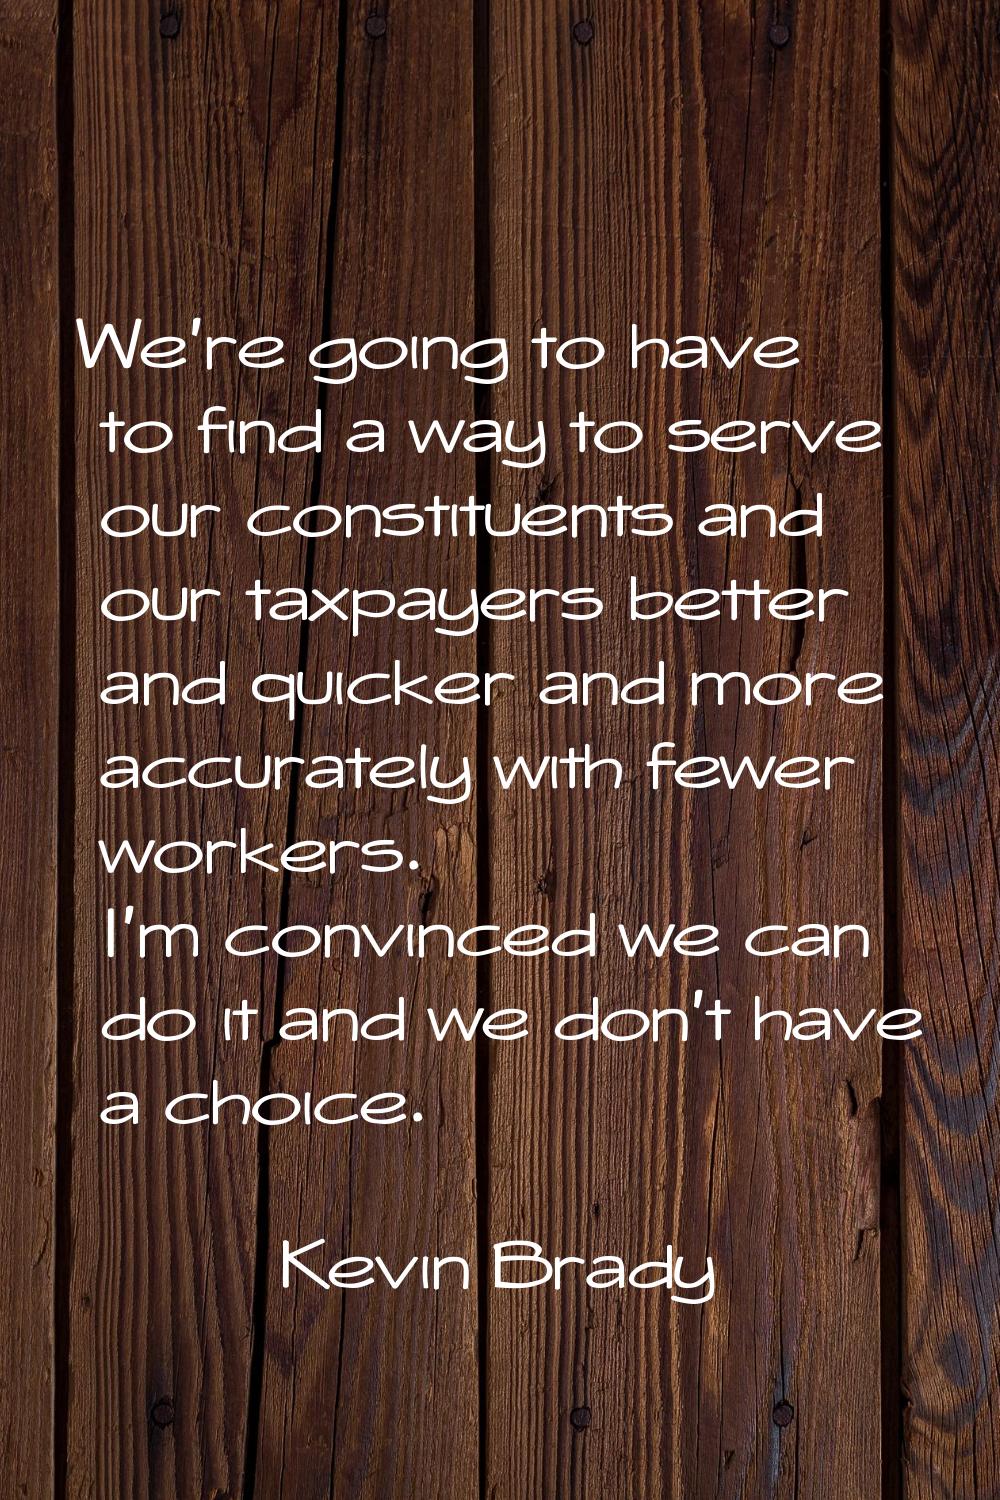 We're going to have to find a way to serve our constituents and our taxpayers better and quicker an